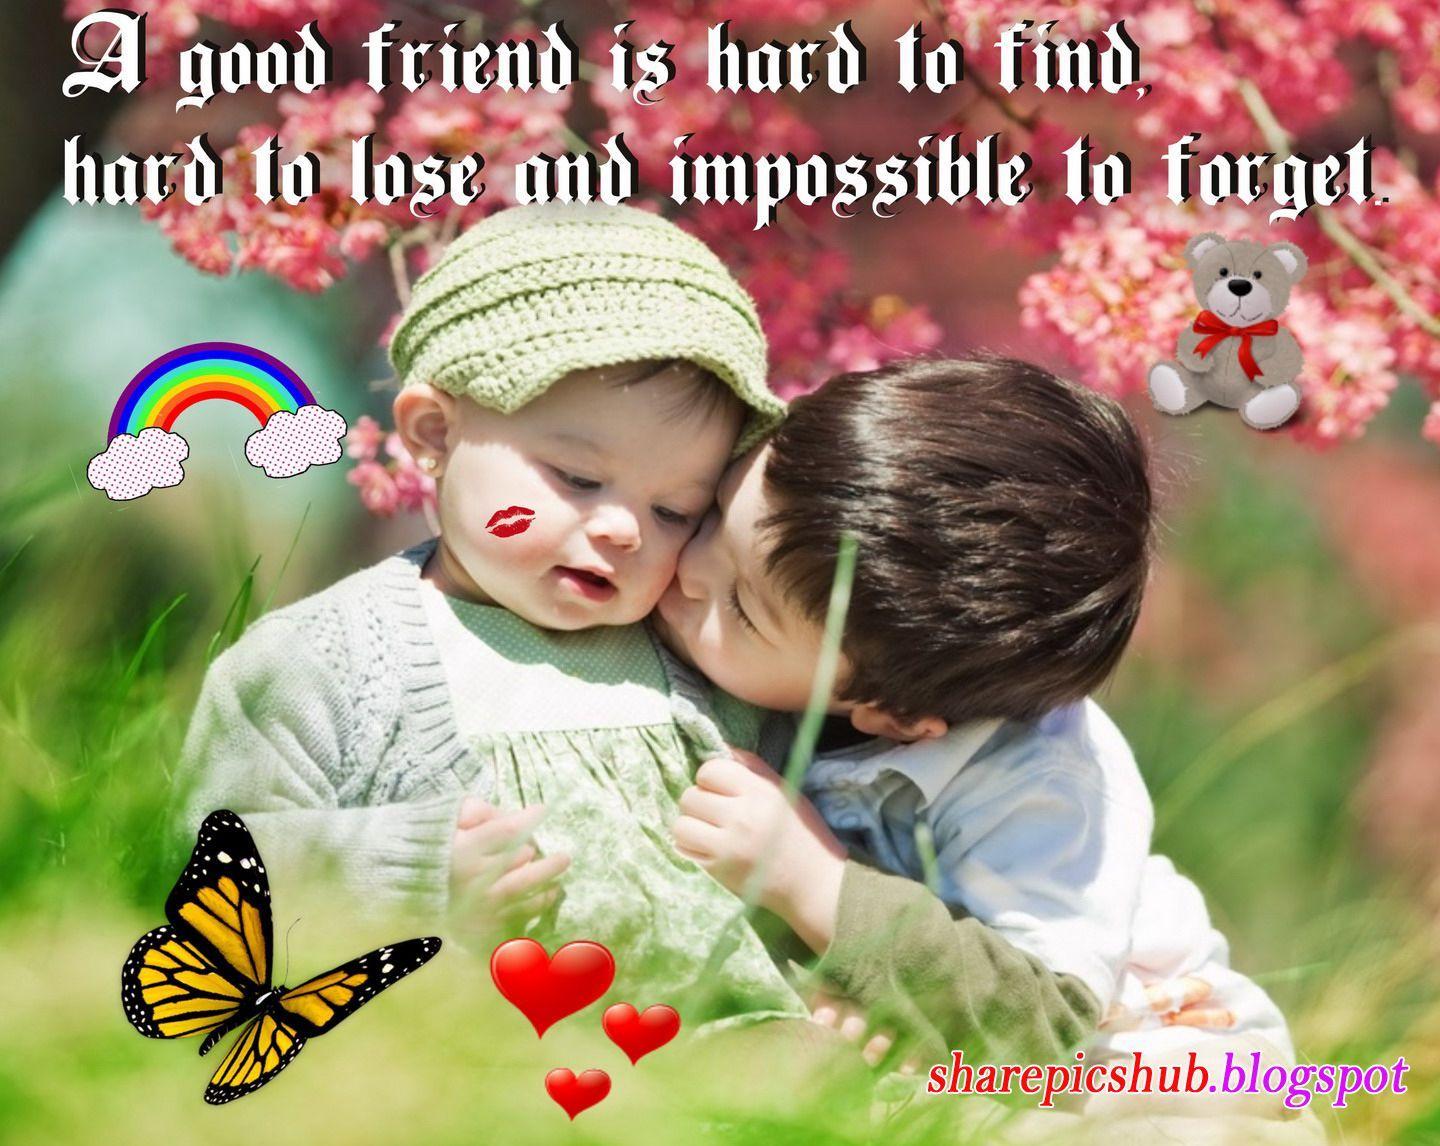 funny friendship quotes for facebook. Beautiful Friendship Quote